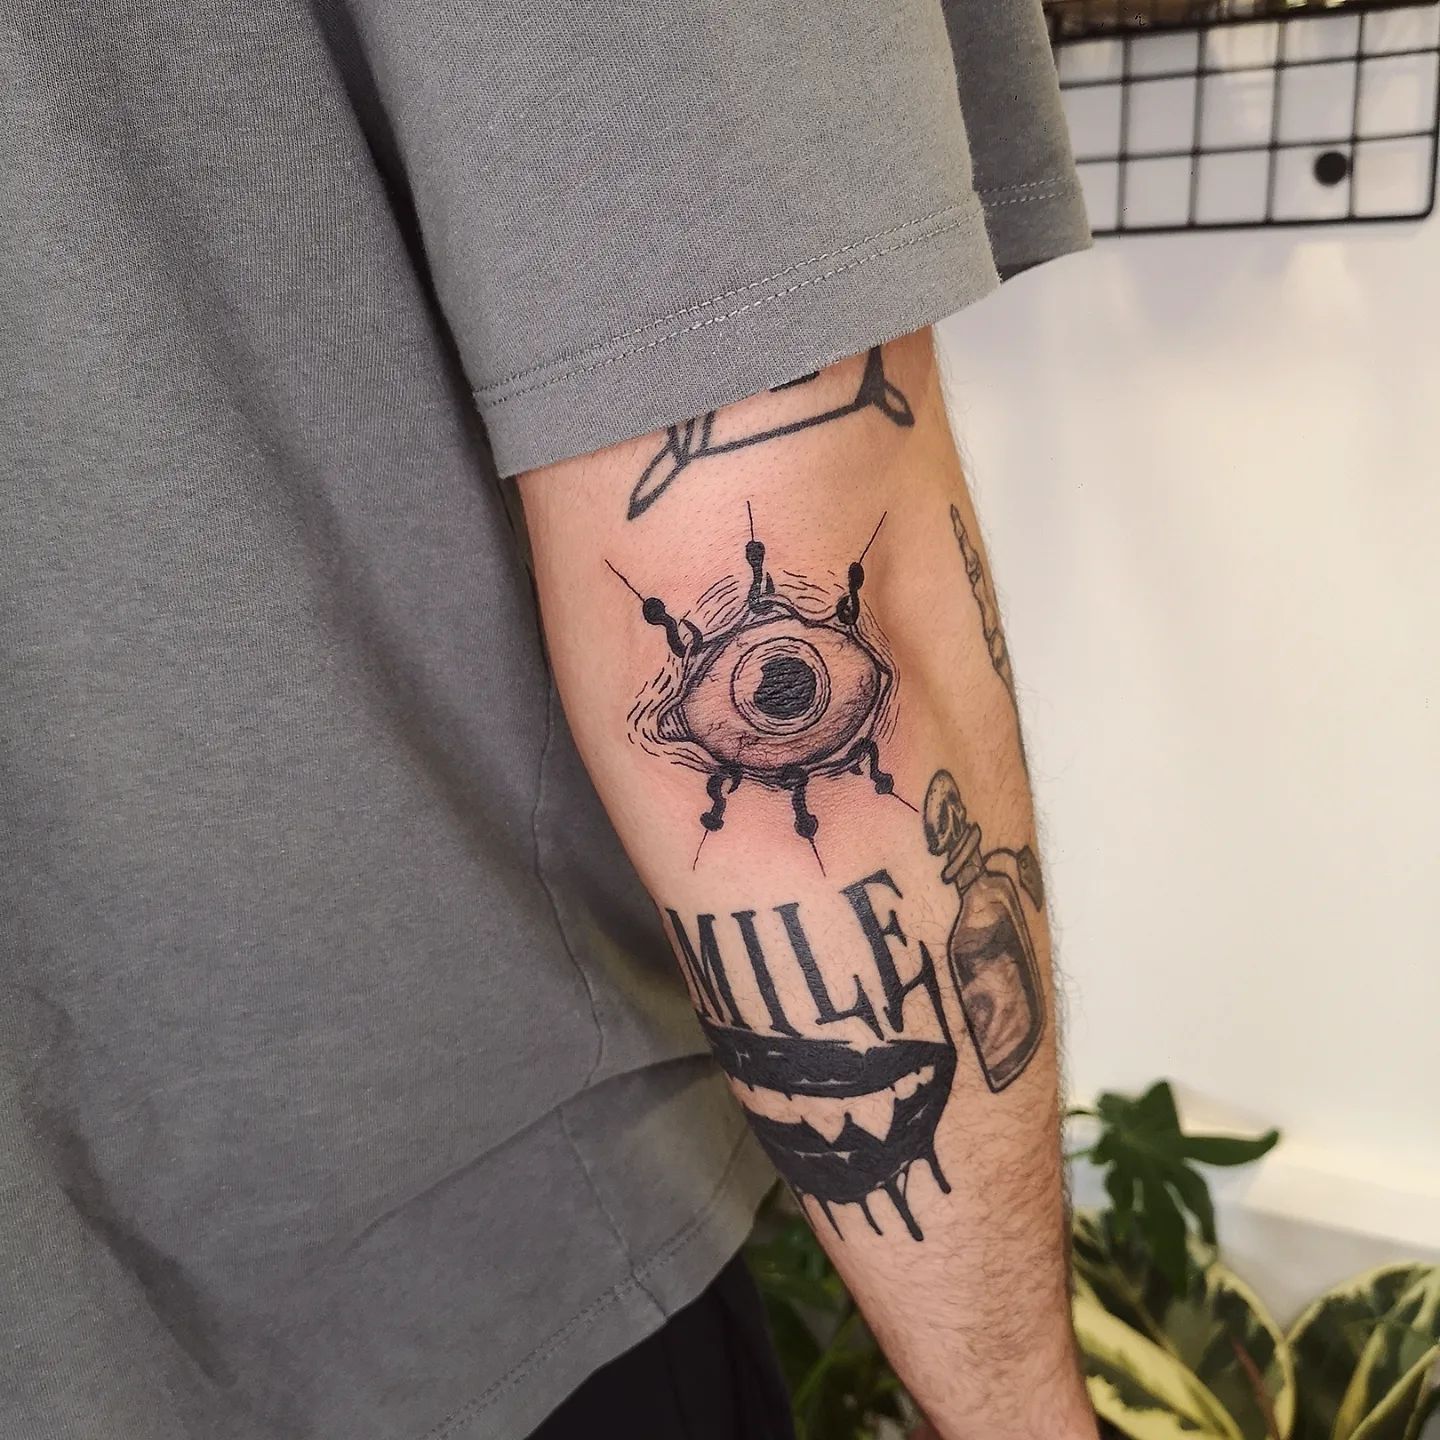 Go for an evil eye tattoo if you wish to stay protected from all evil things. This design can be used as your way of fighting bad and negative energy. Most people who are skeptics in life might fancy this more than others.